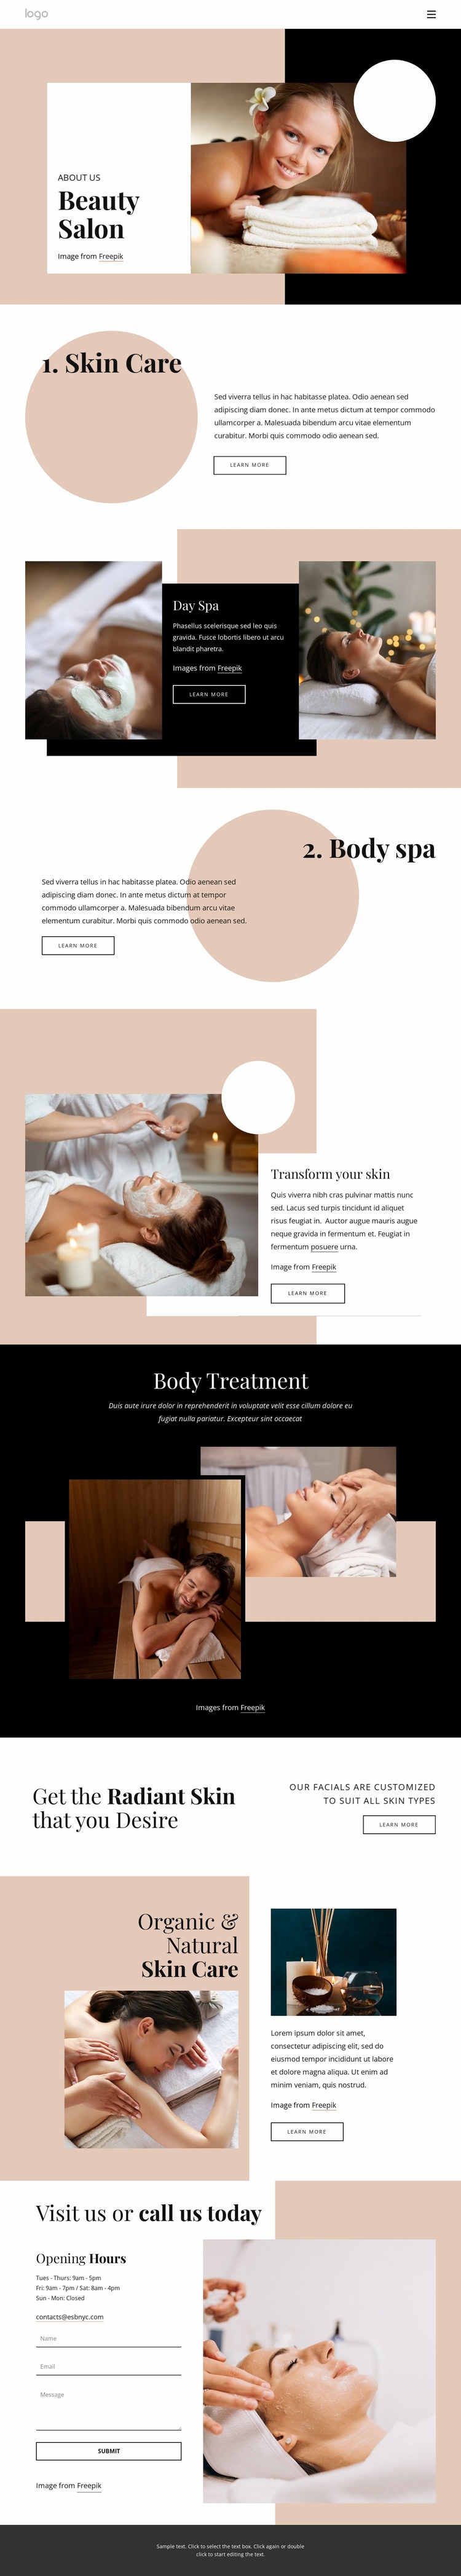 New wellness experiences eCommerce Template